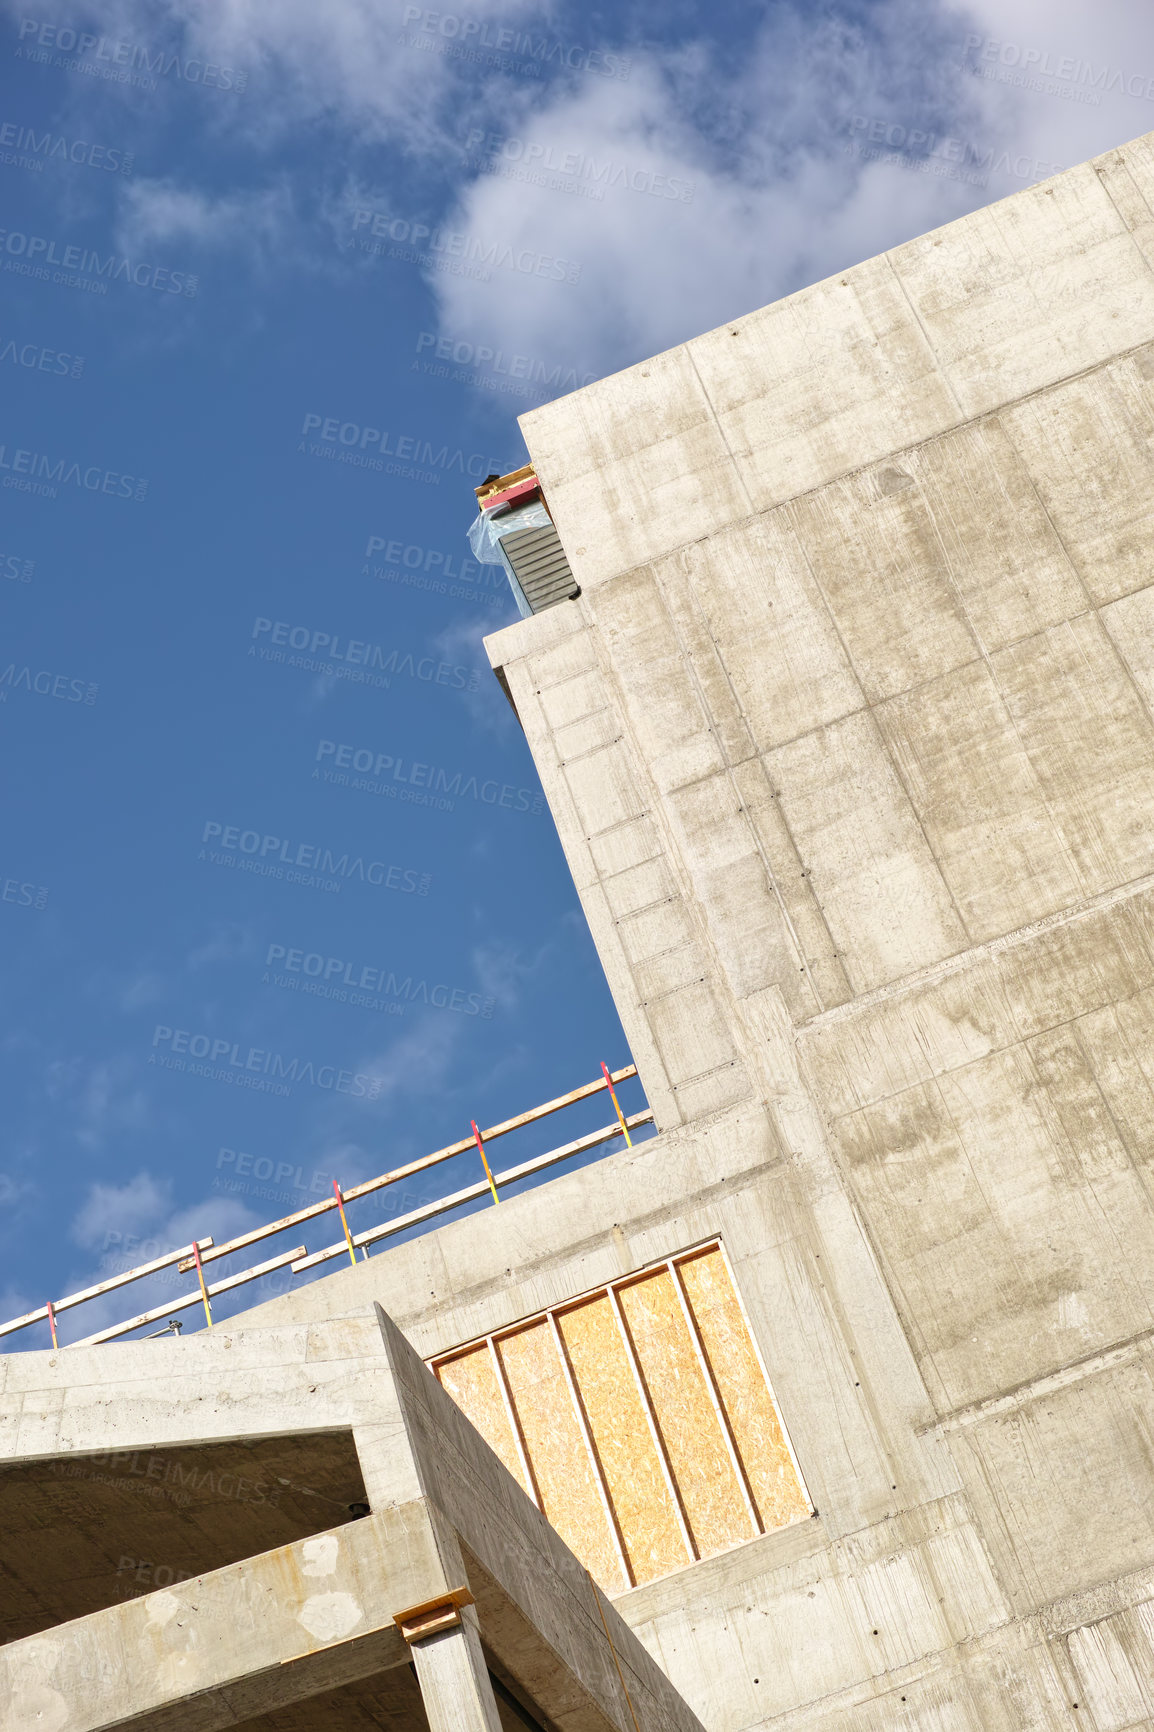 Buy stock photo Exterior of a concrete building against a cloudy blue sky. Detail view of a tall residential or office building made of exposed concrete slabs. Construction phase of home remodel and addition